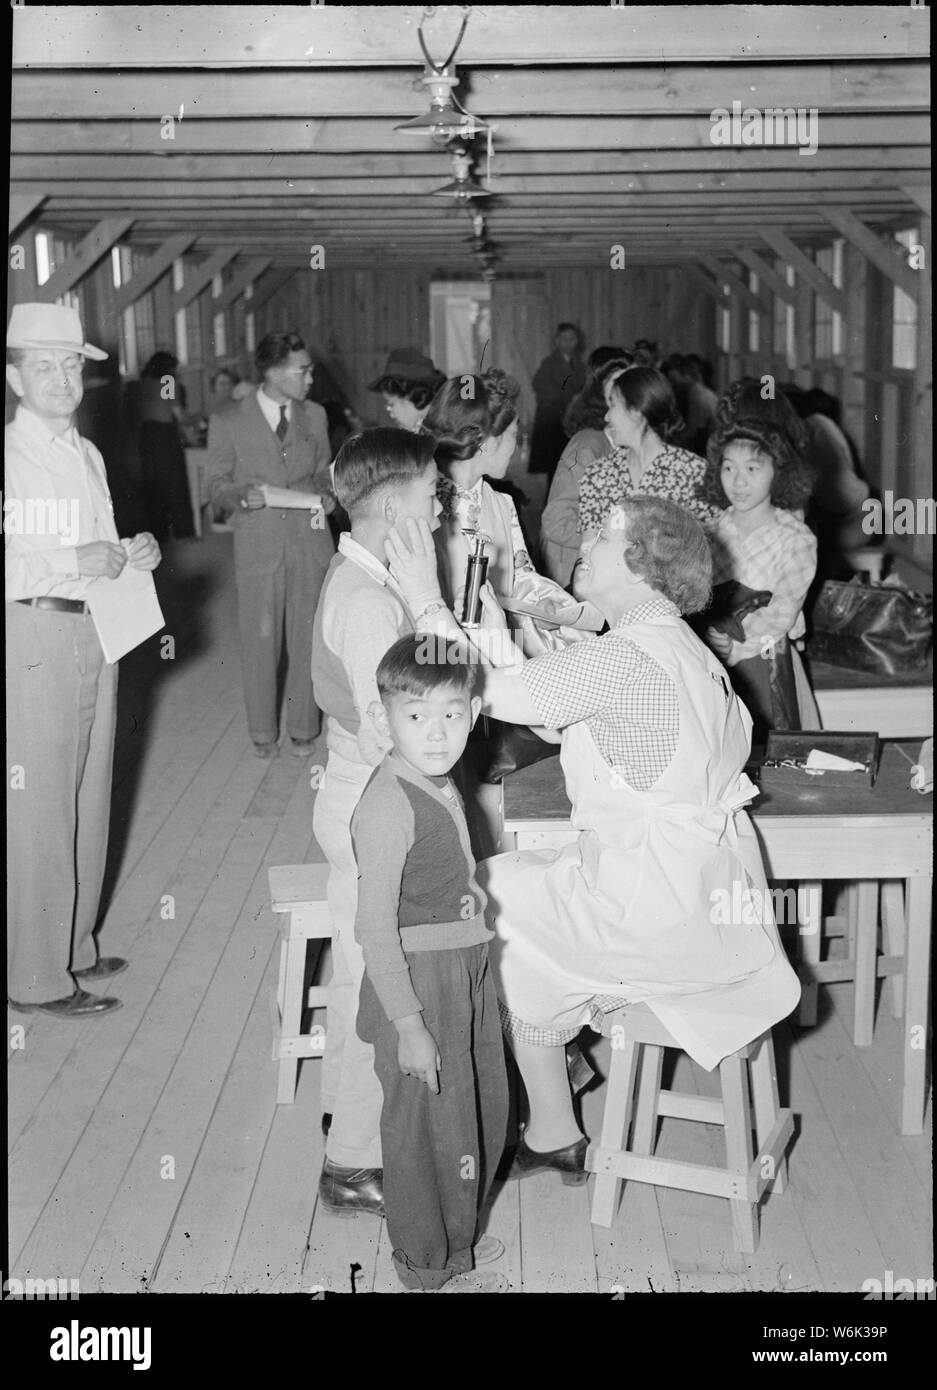 Poston, Arizona. Evacuees of Japanese ancestry are given a preliminary medical examination upon arr . . .; Scope and content:  The full caption for this photograph reads: Poston, Arizona. Evacuees of Japanese ancestry are given a preliminary medical examination upon arrival at this War Relocation Authority center. Stock Photo